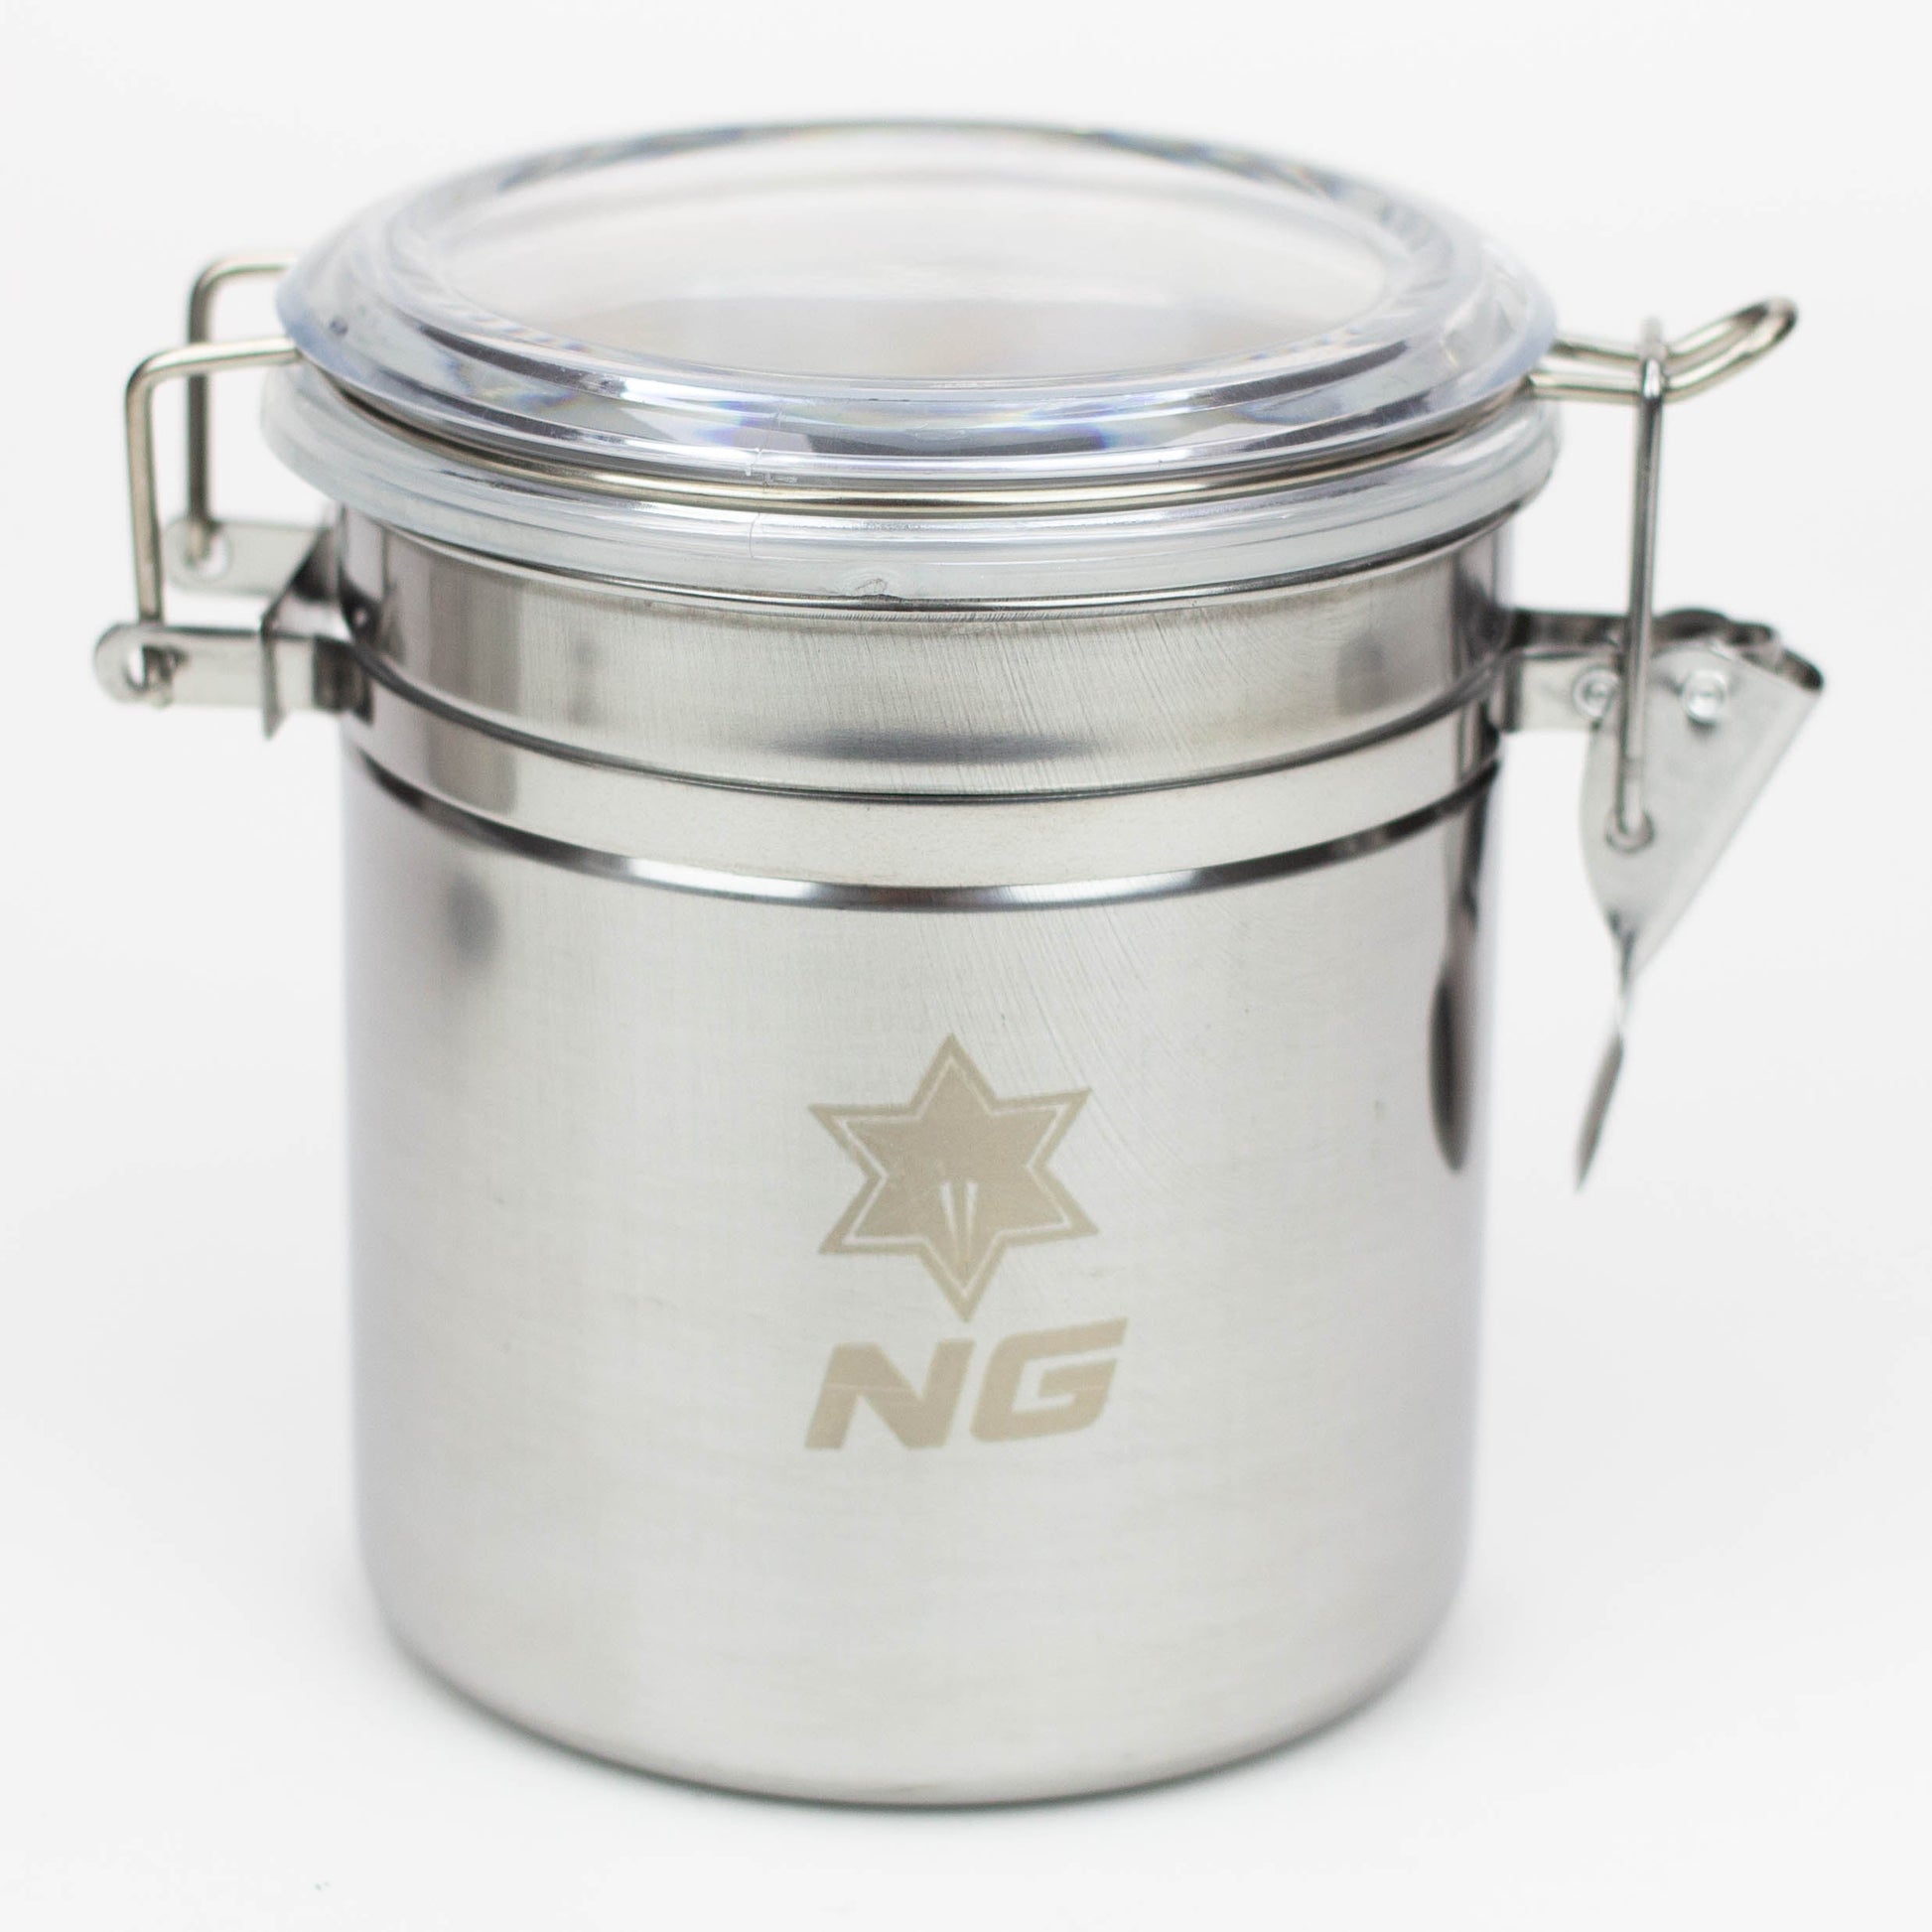 NG - Stainless Metal Canister_3